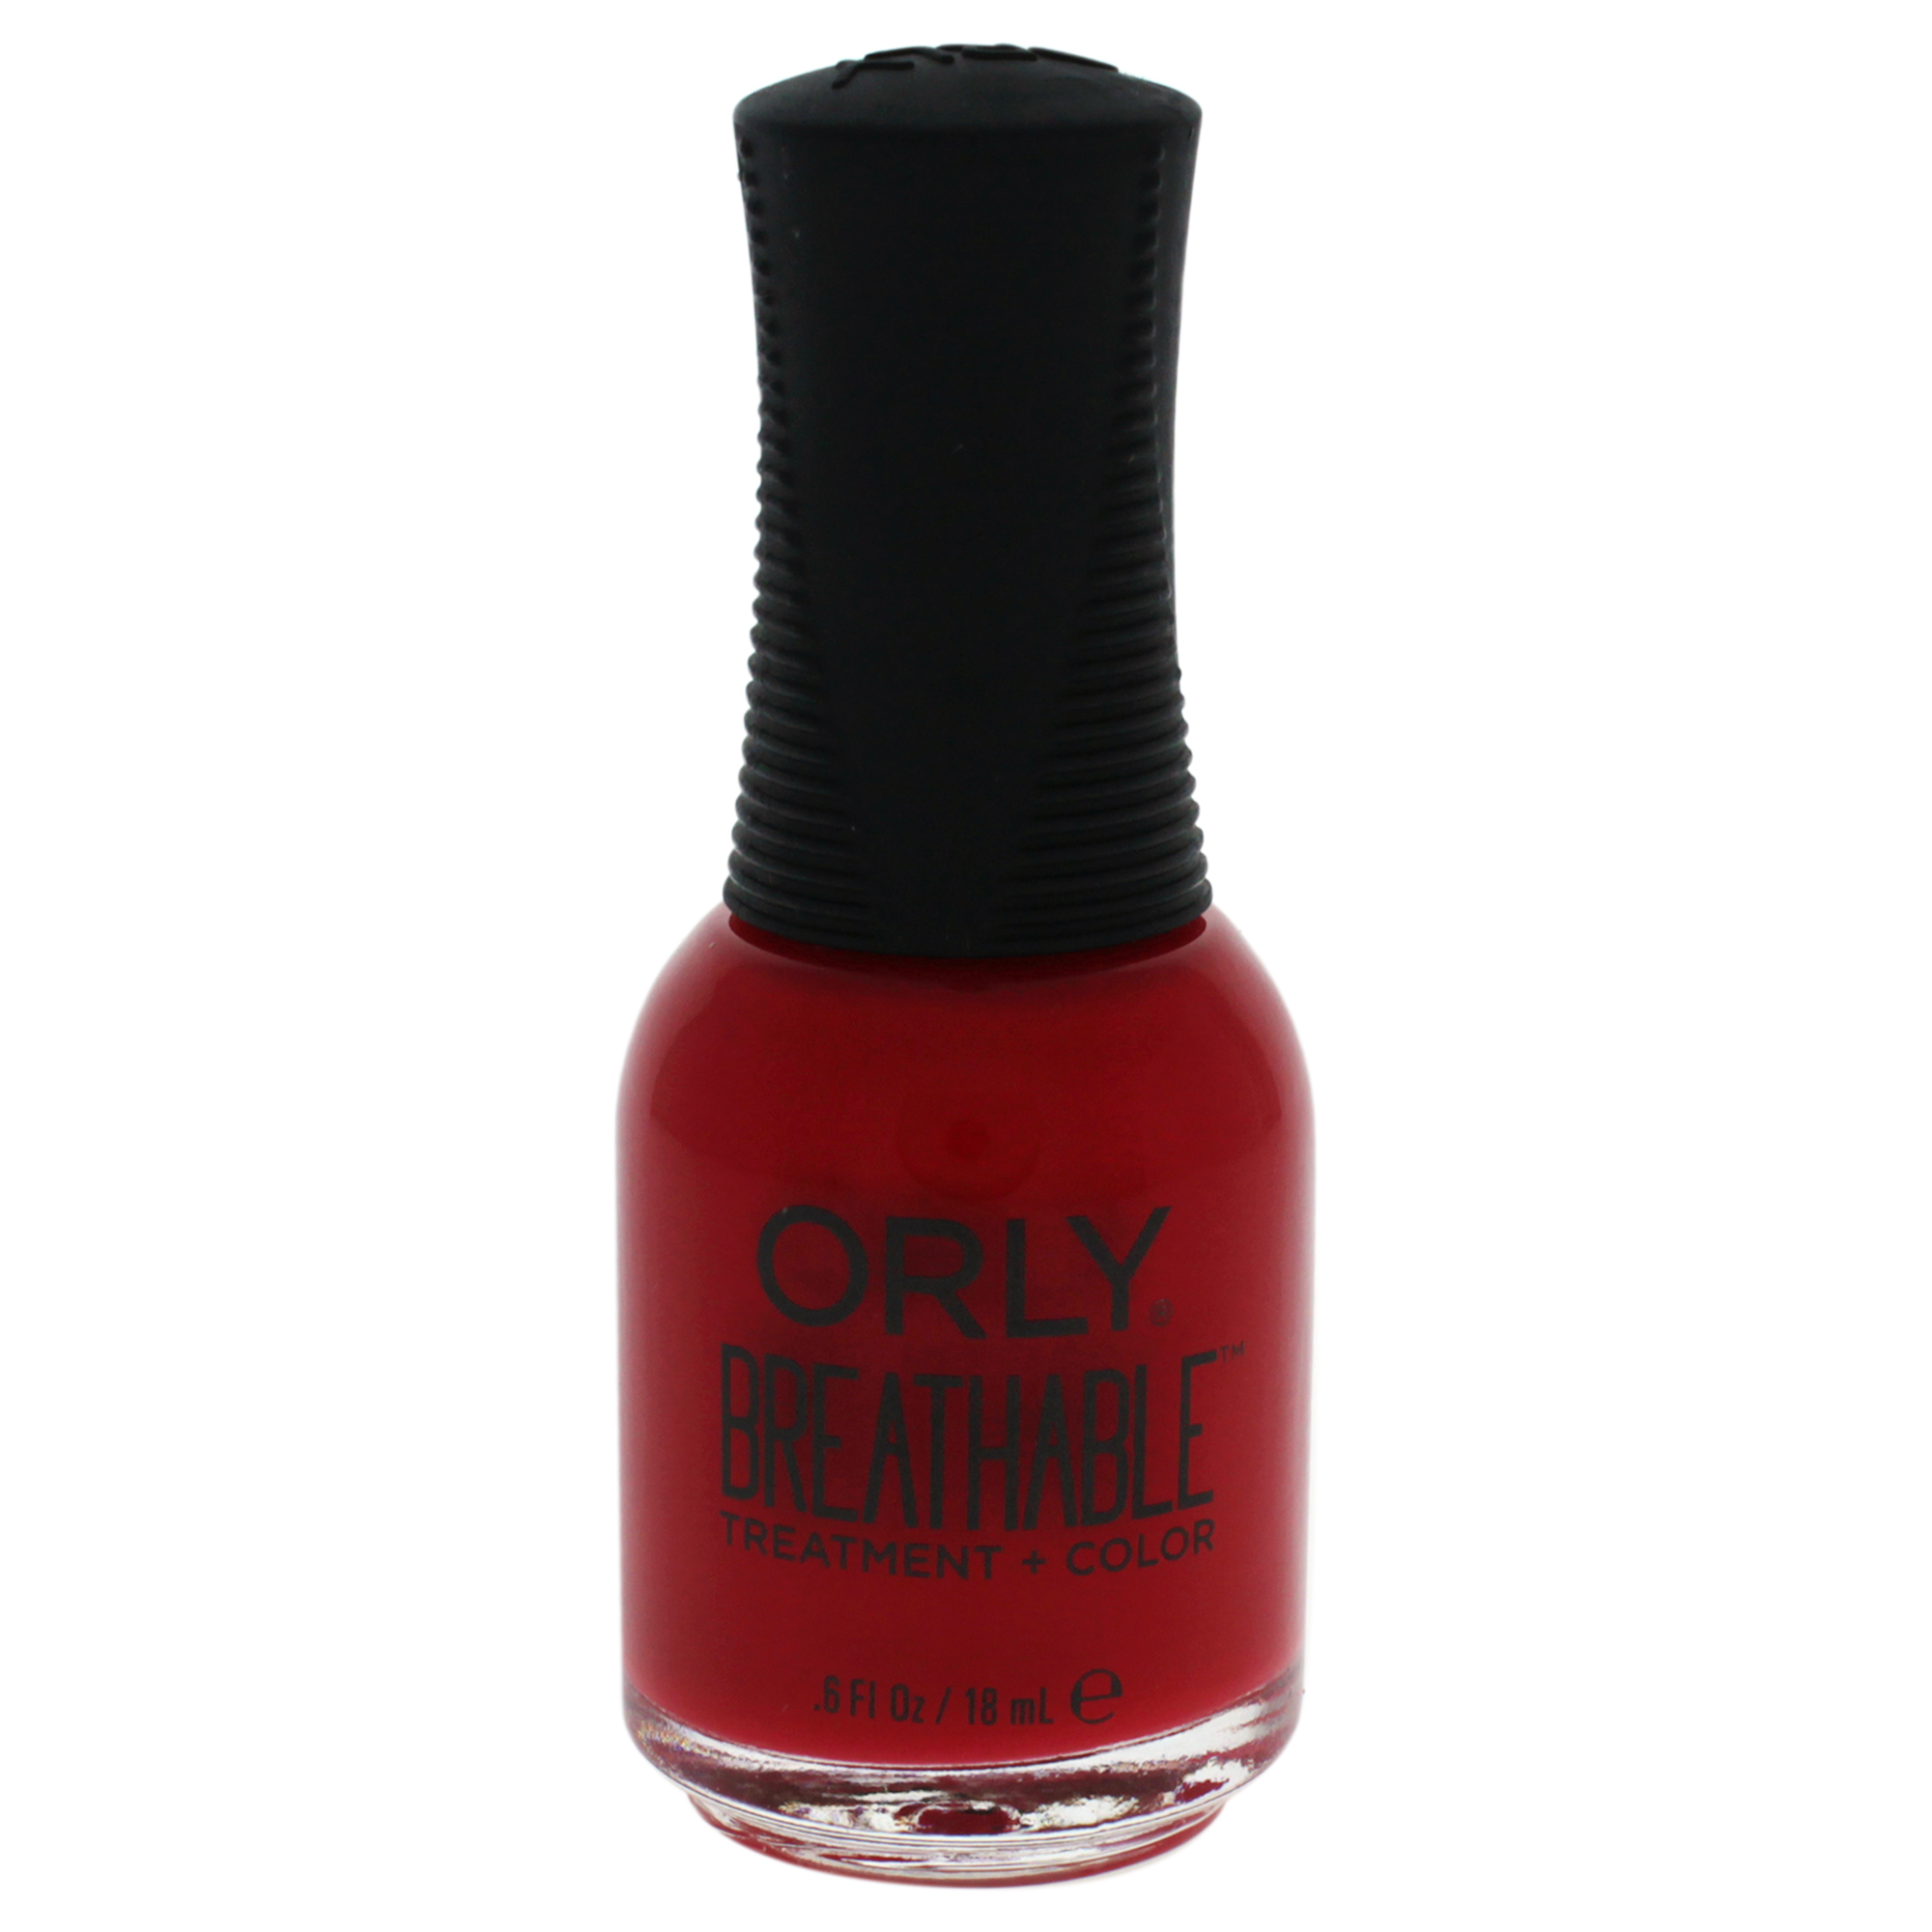 Orly Breathable Treatment + Color Nail Polish - image 1 of 4